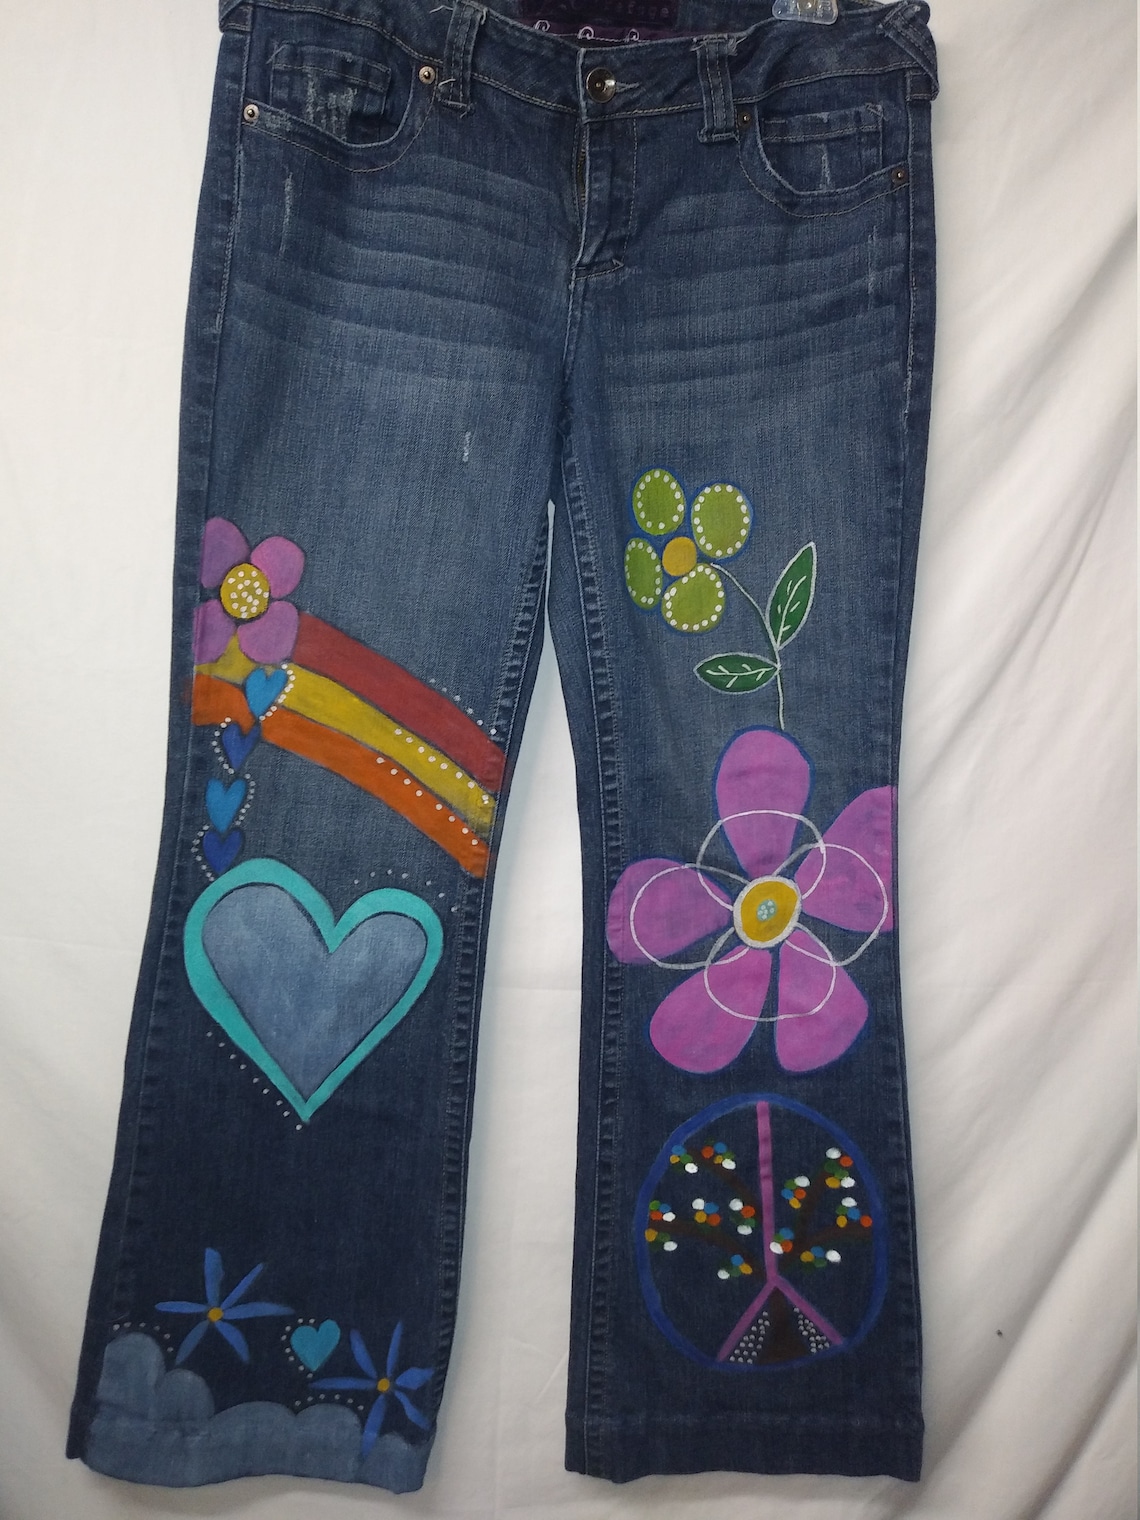 Hearts Flowers Peace Sign and Rainbow Painted Jeans Refuge - Etsy